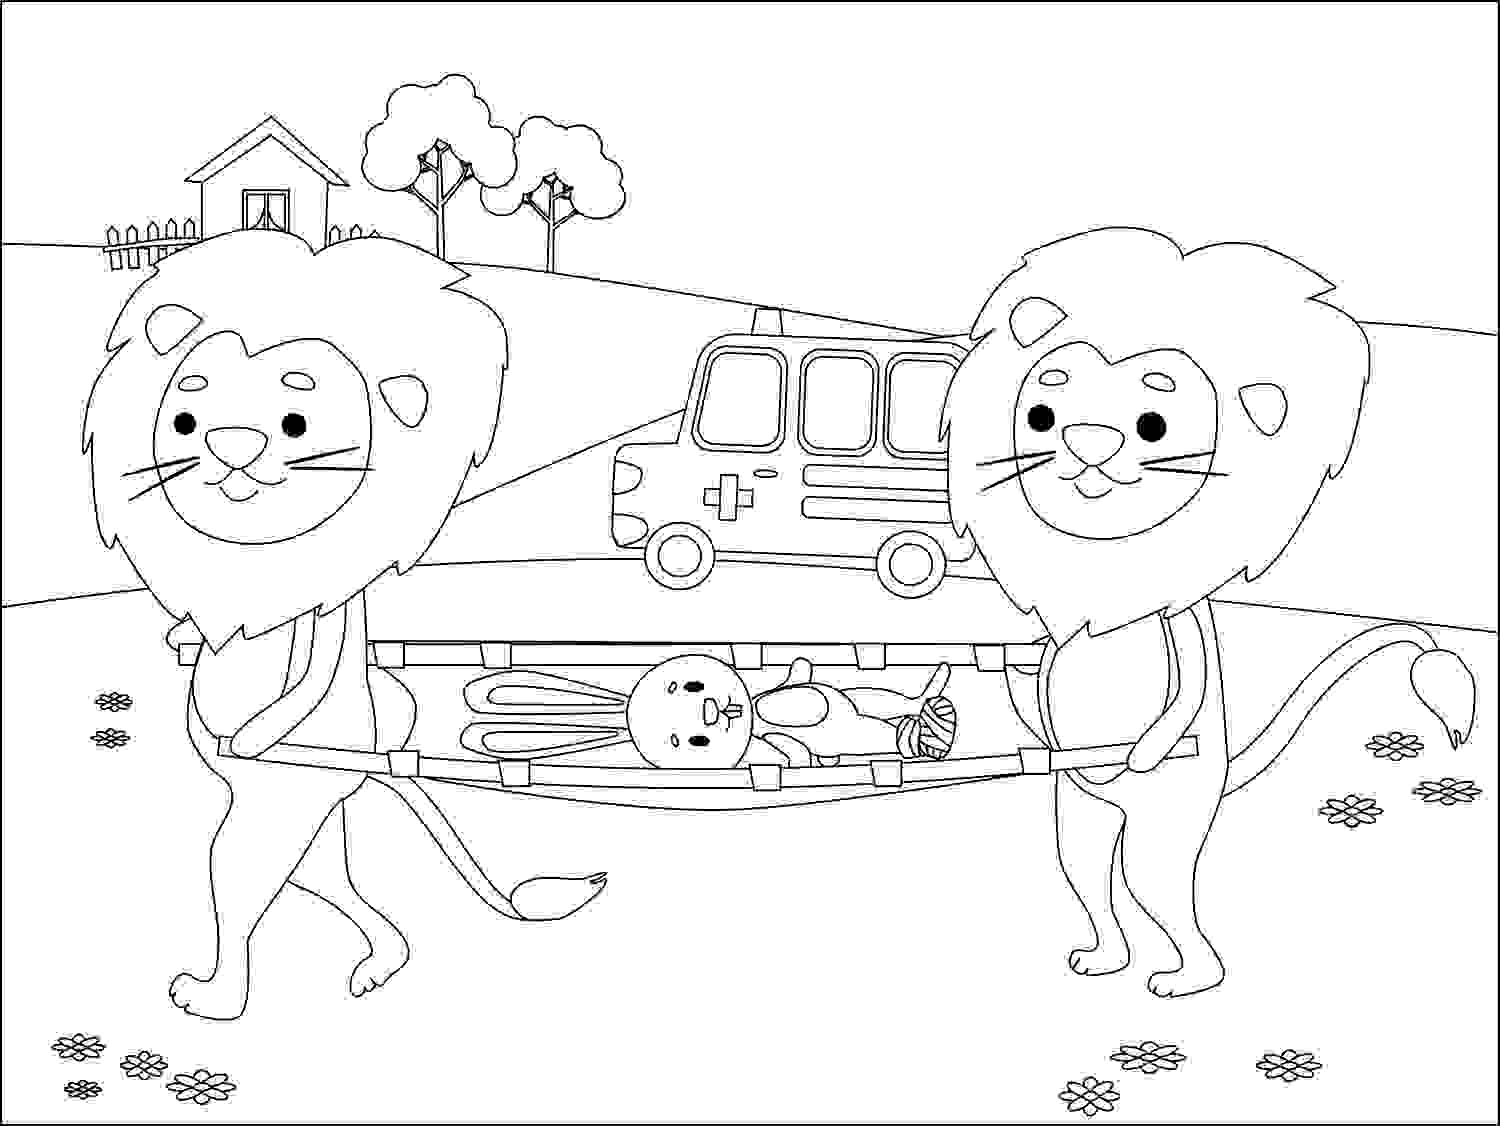 Doctor animal doctor lion and patients bunny Coloring Page